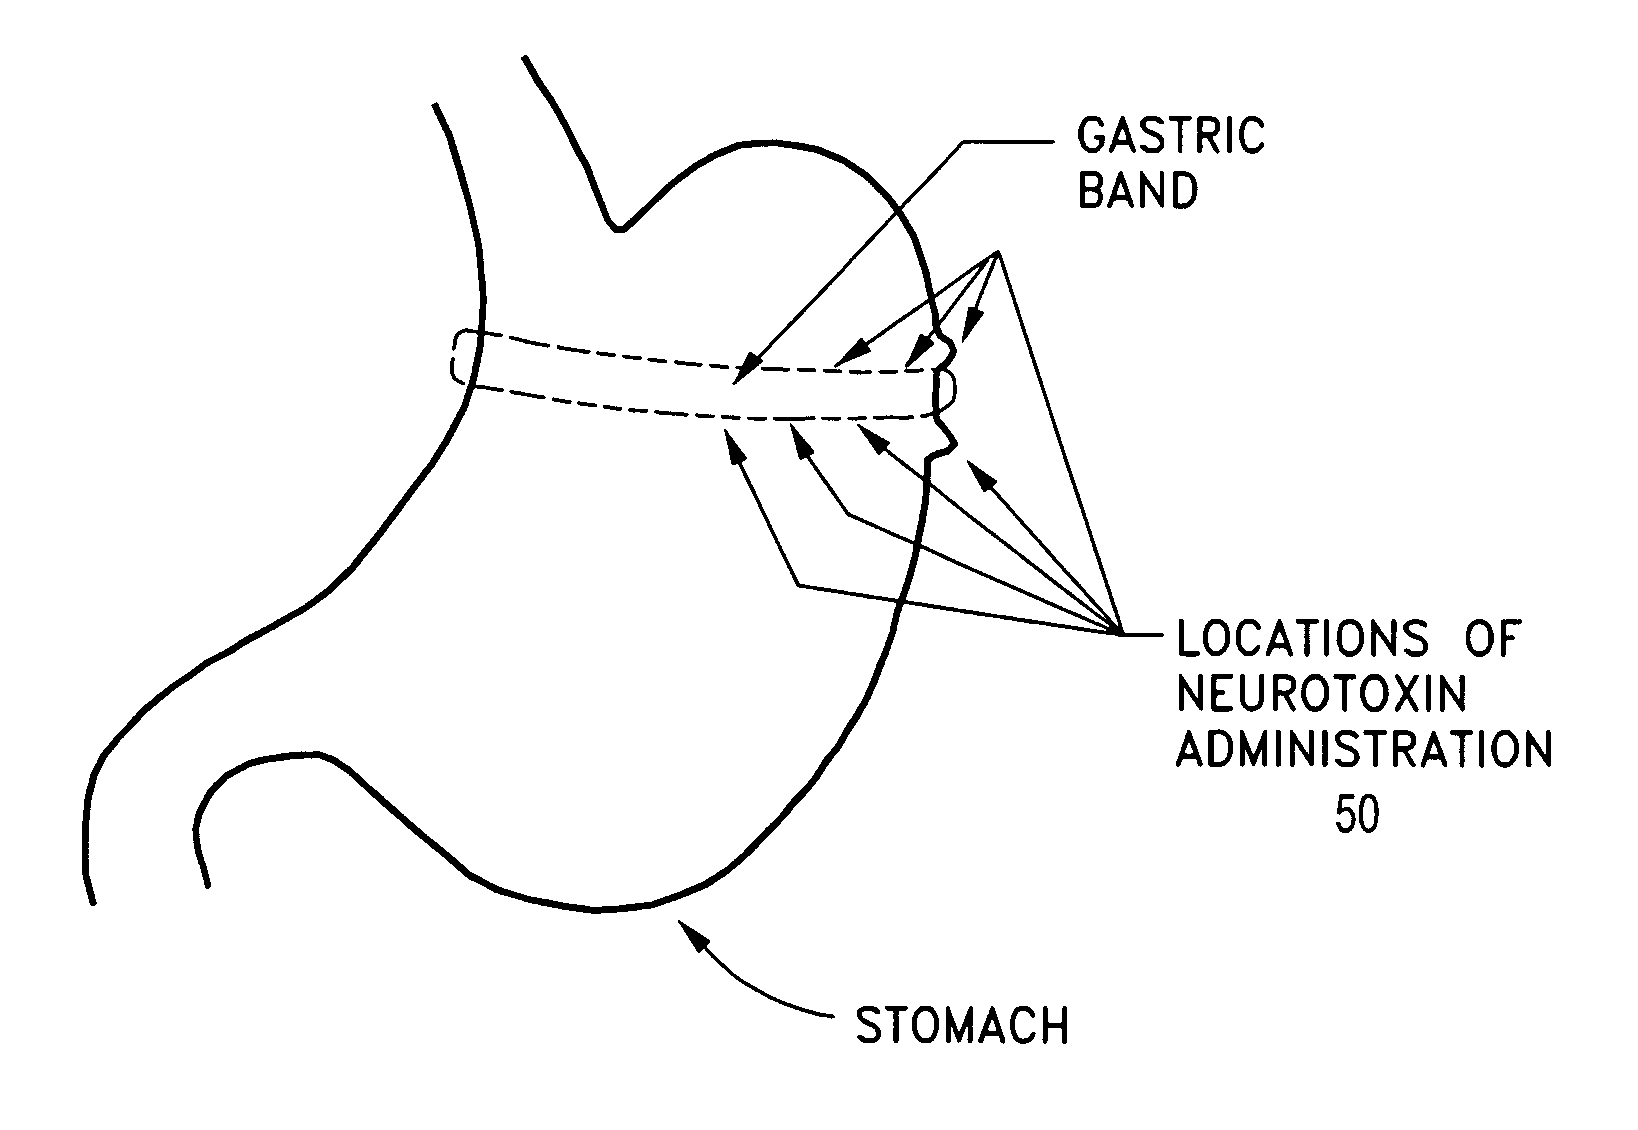 Apparatus and method for treating obesity using neurotoxins in conjunction with bariatric procedures